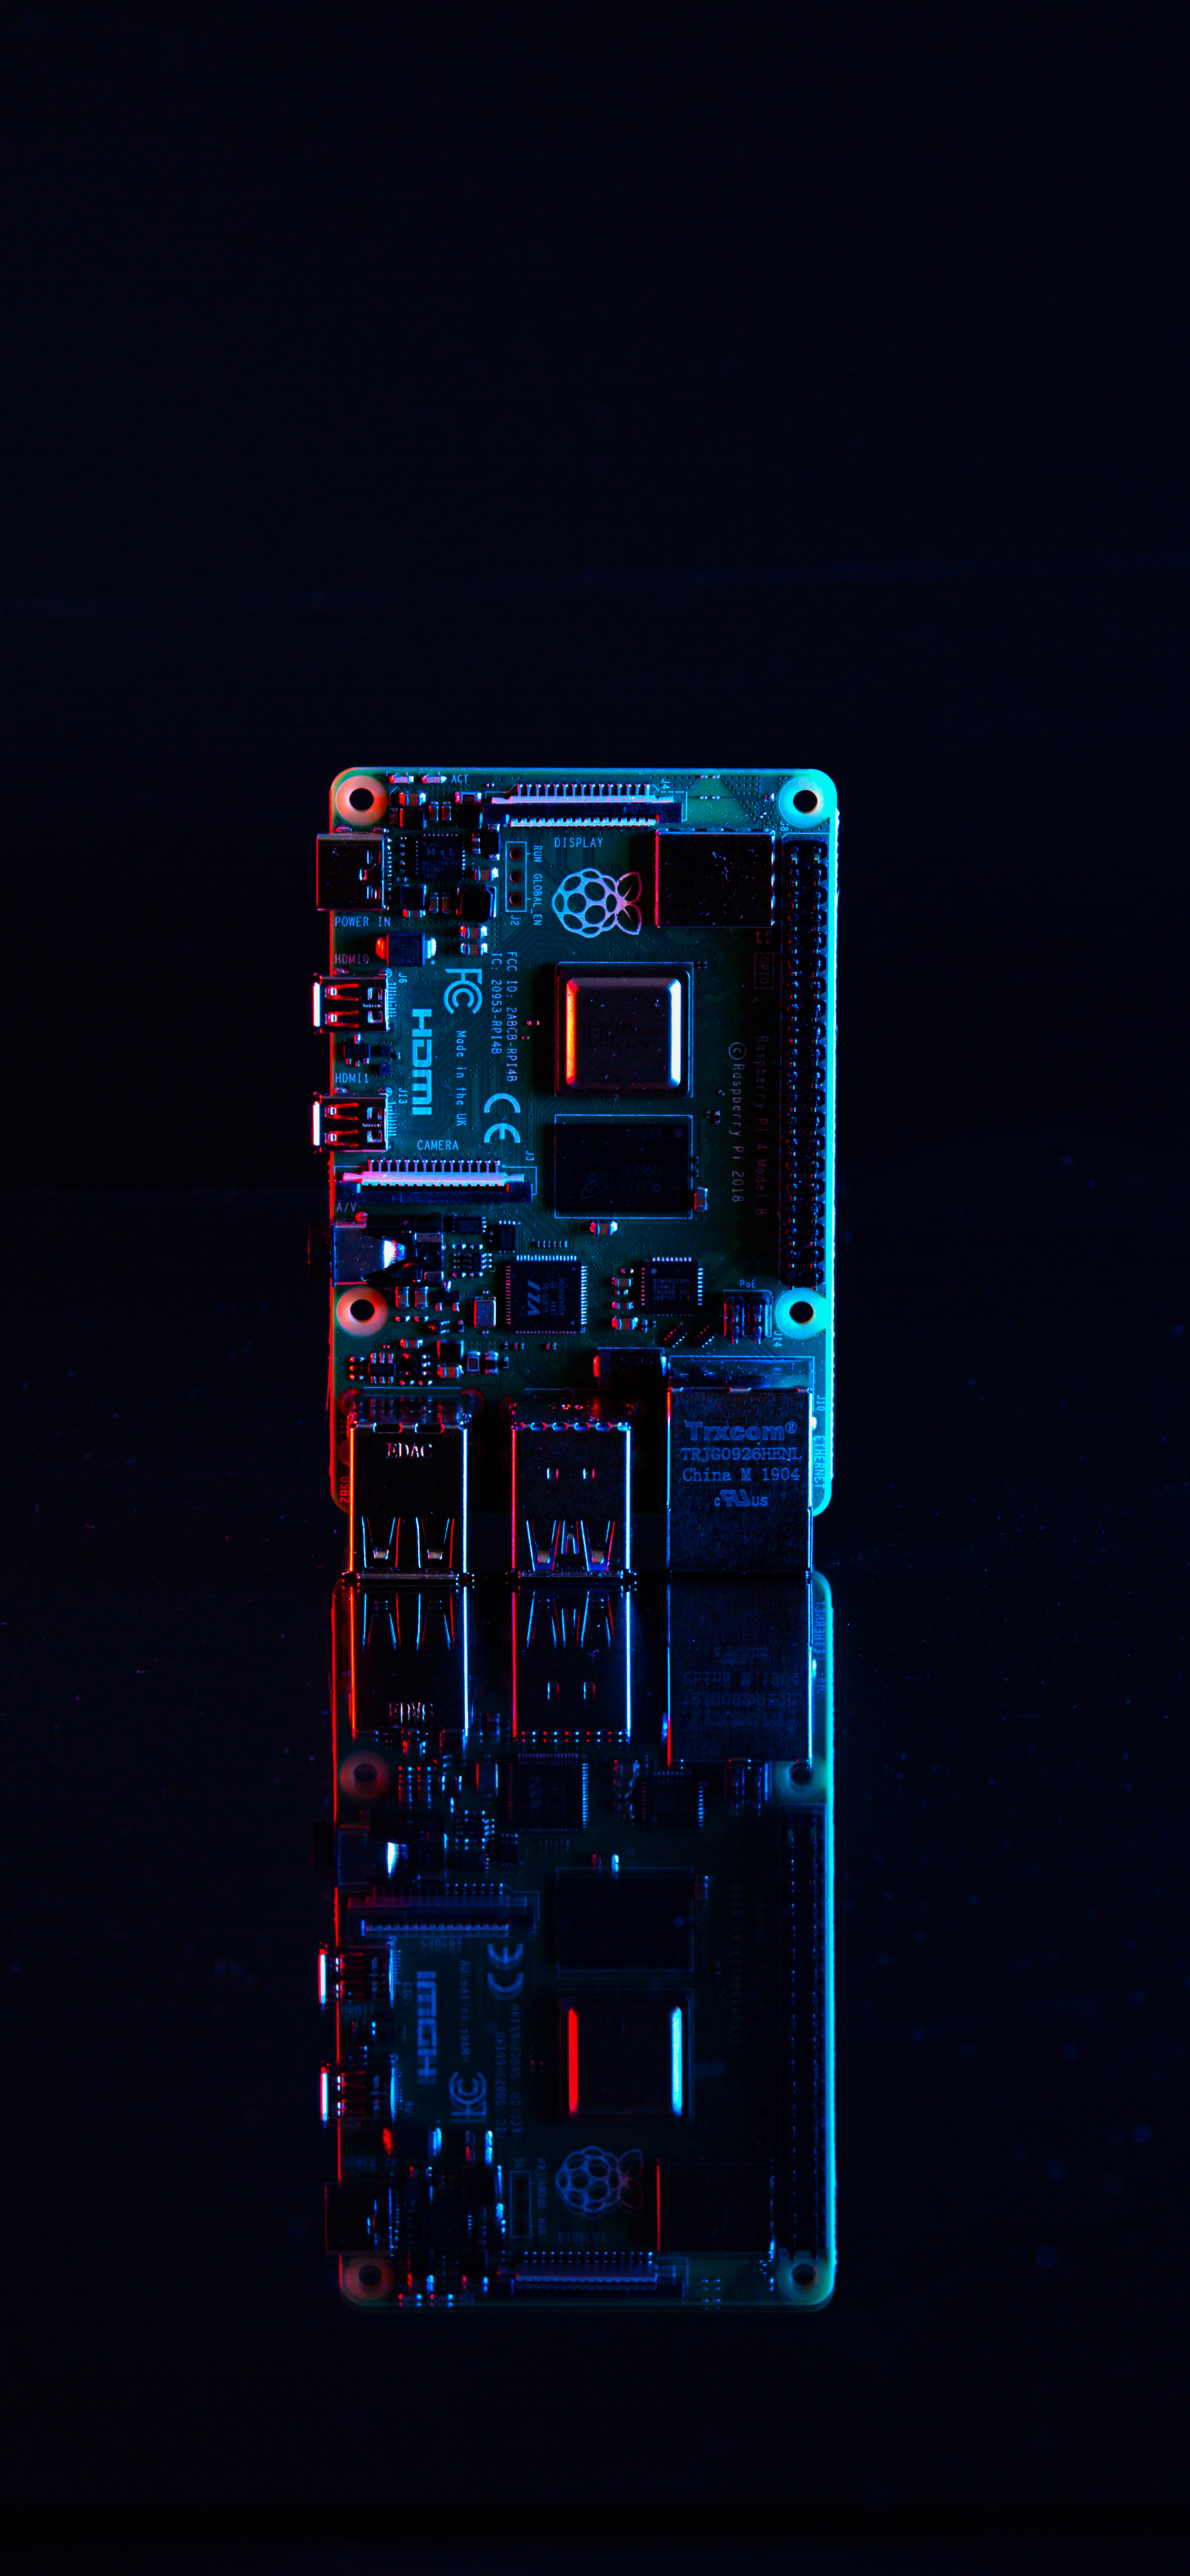 A Rather Snazzy Raspberry Pi Wallpaper For Your Phone And